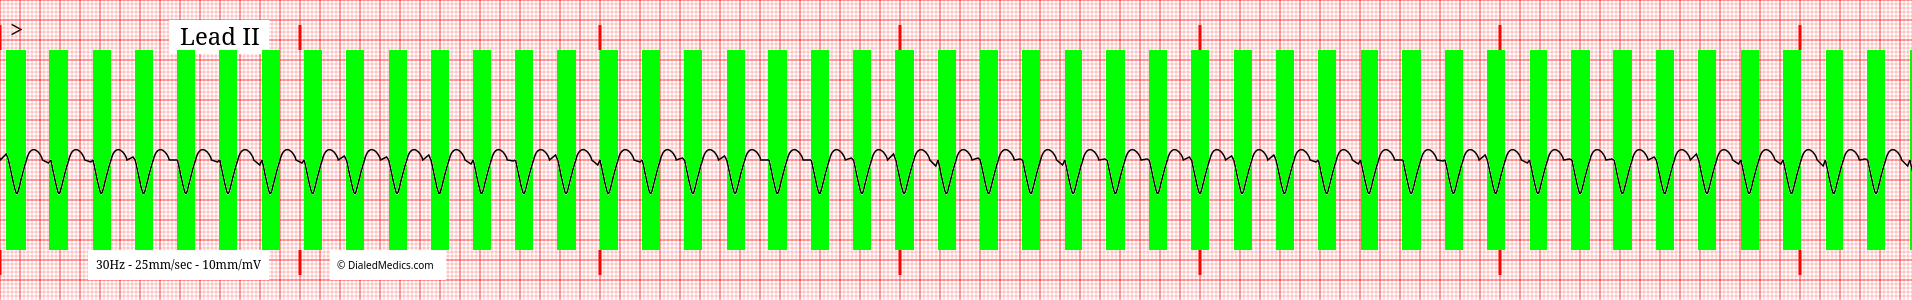 Ventricular Tachycardia with wide QRS complexes highlighted in green.